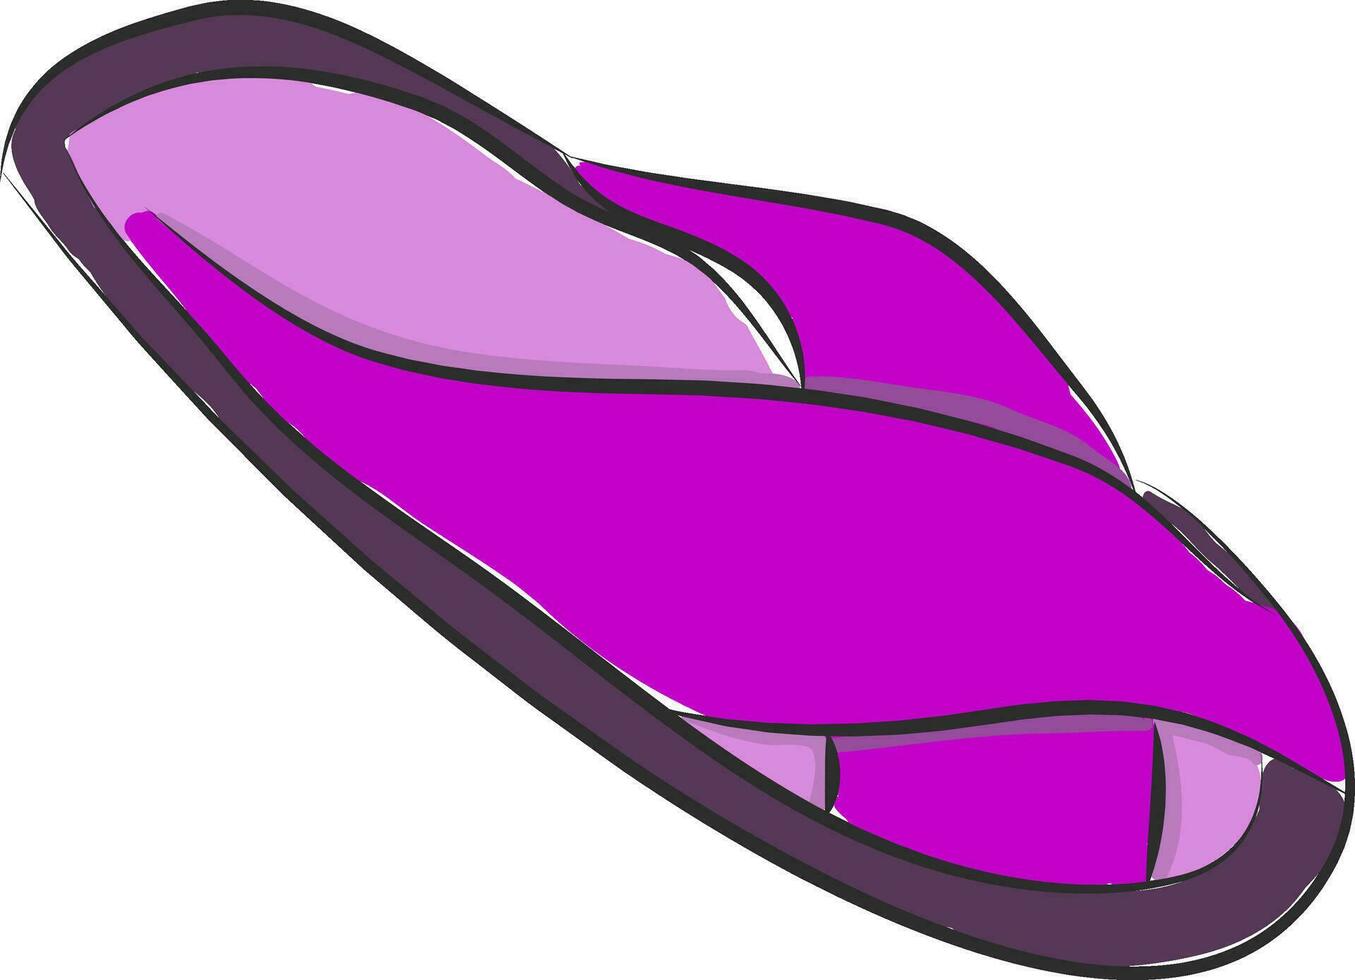 Simple vector illustration on white background of a purple slipper